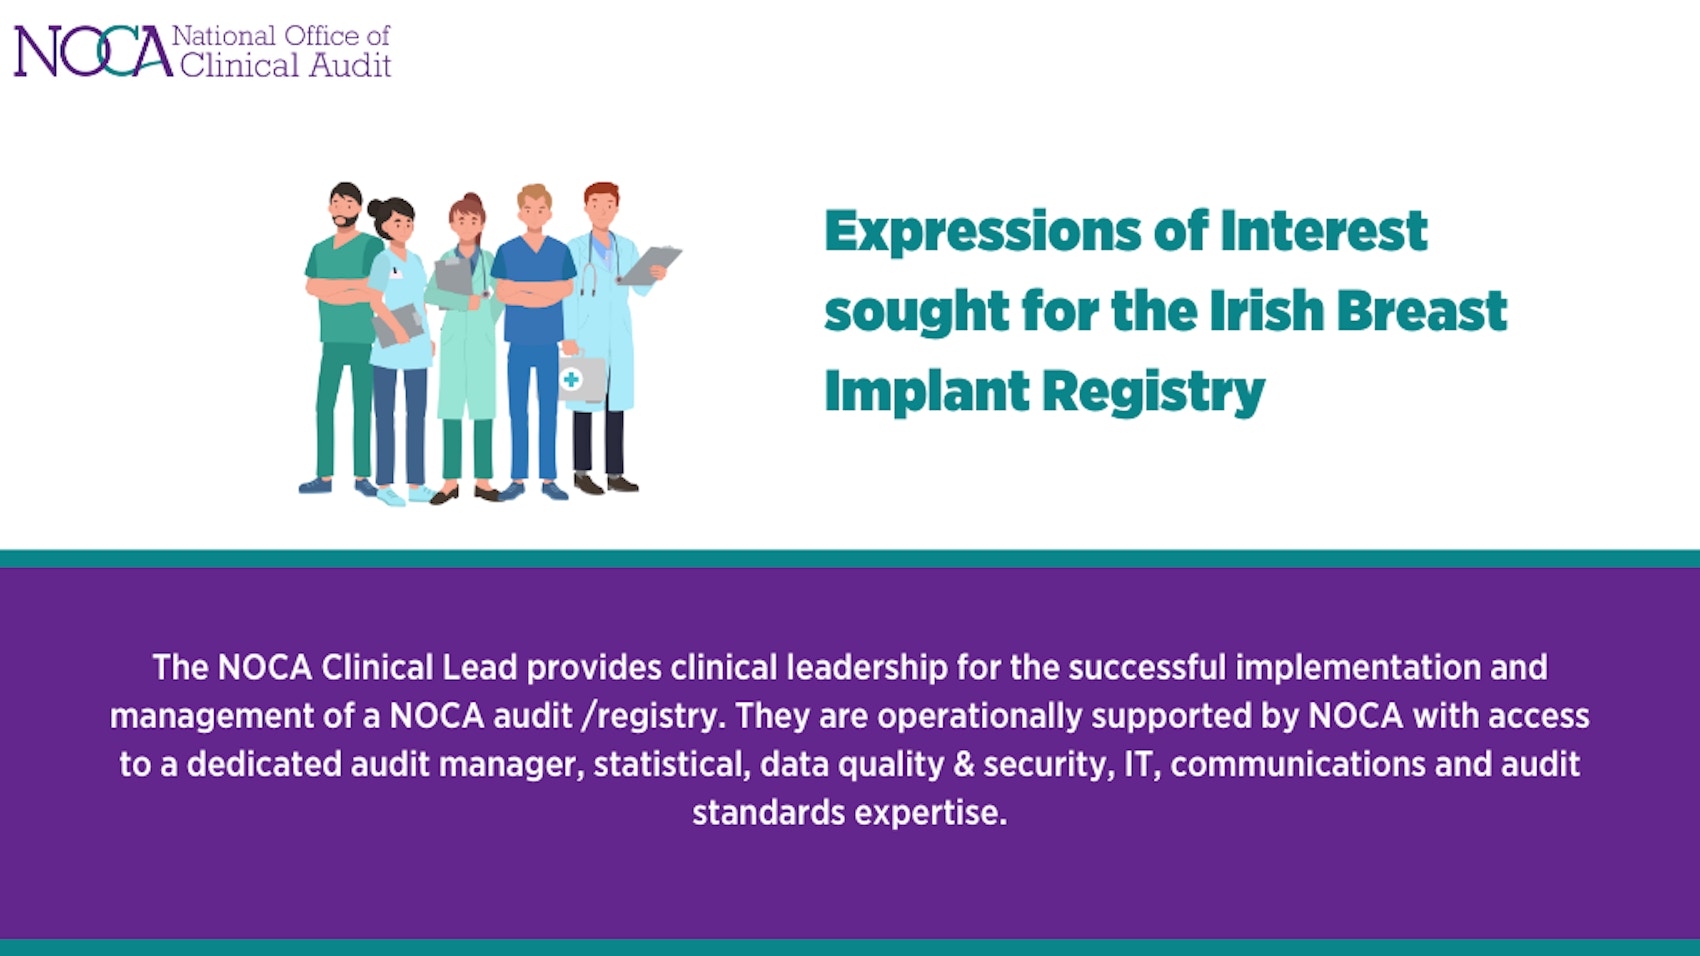 Expressions of Interest sought for the Irish Breast Implant Registry